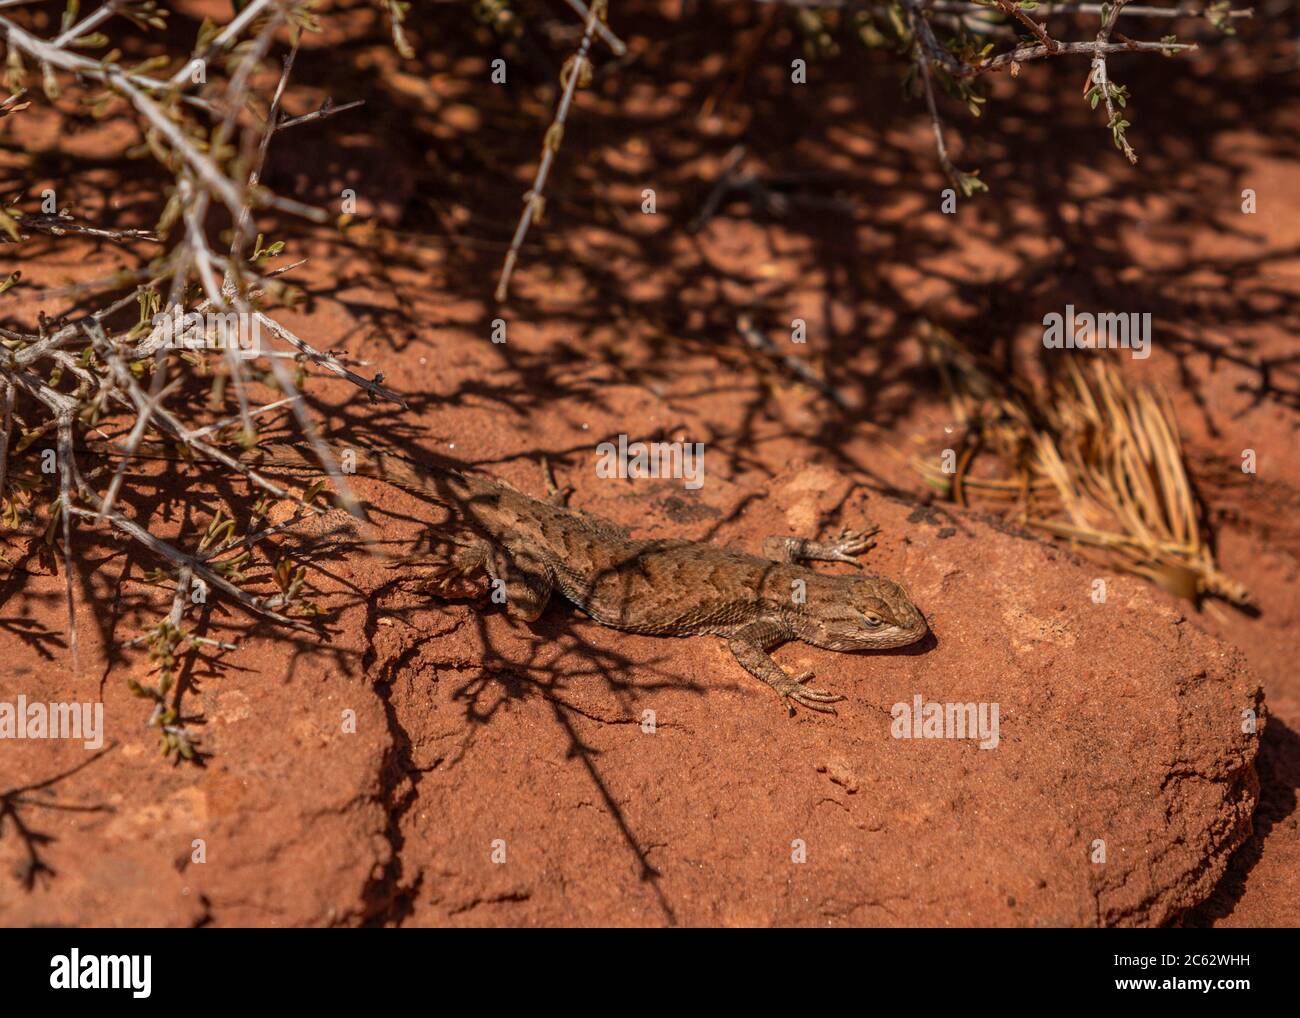 An Eastern Fence Lizard receives warmth from the sun and rocks while staying partially hidden under a thorn bush. Stock Photo